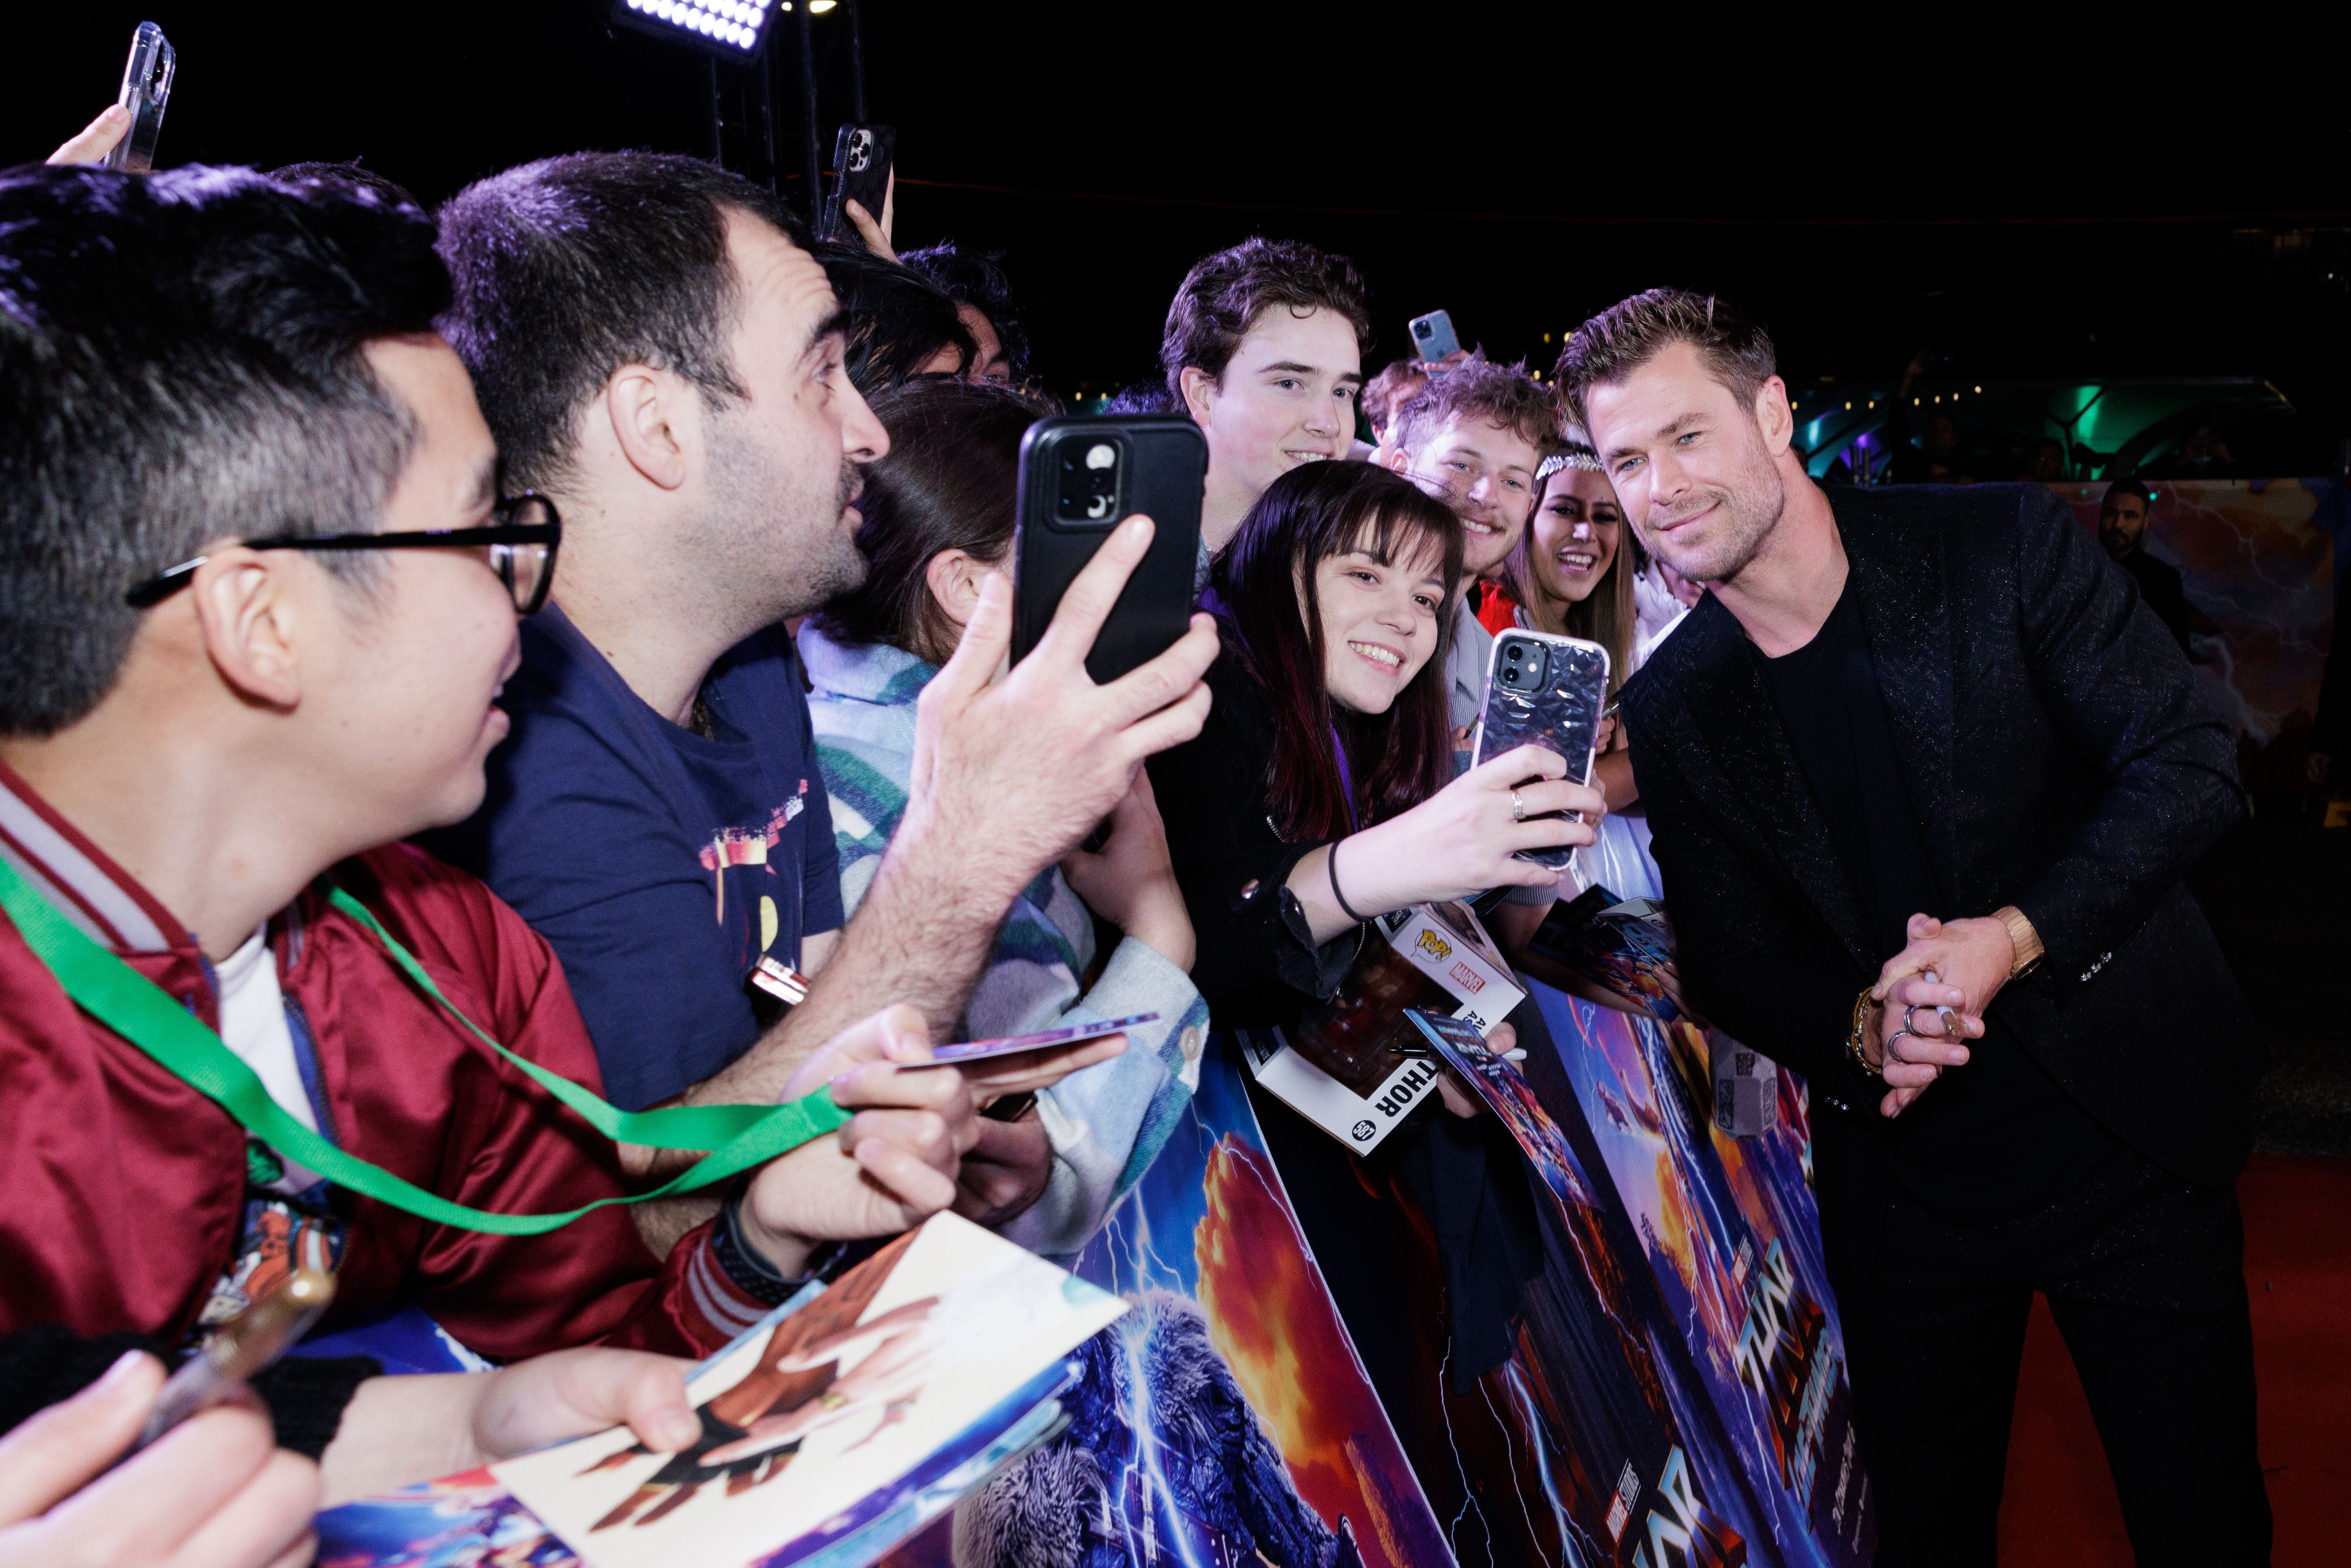 Chris Hemsworth taking photographs with fans